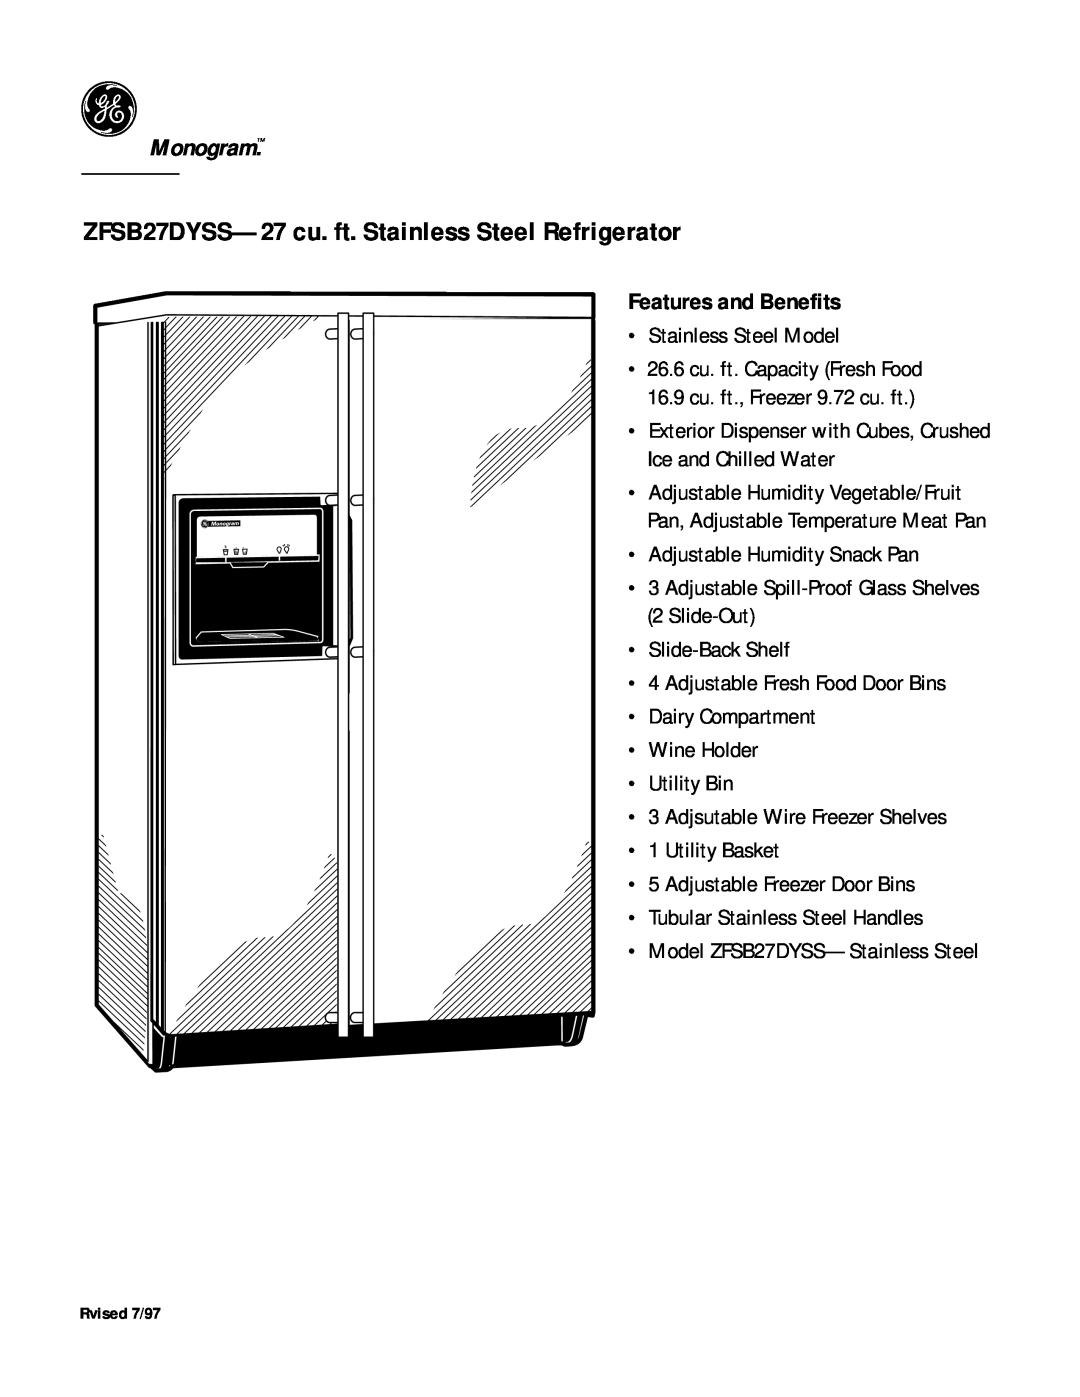 GE Monogram dimensions ZFSB27DYSS-27 cu. ft. Stainless Steel, Monogram, Features and Benefits 